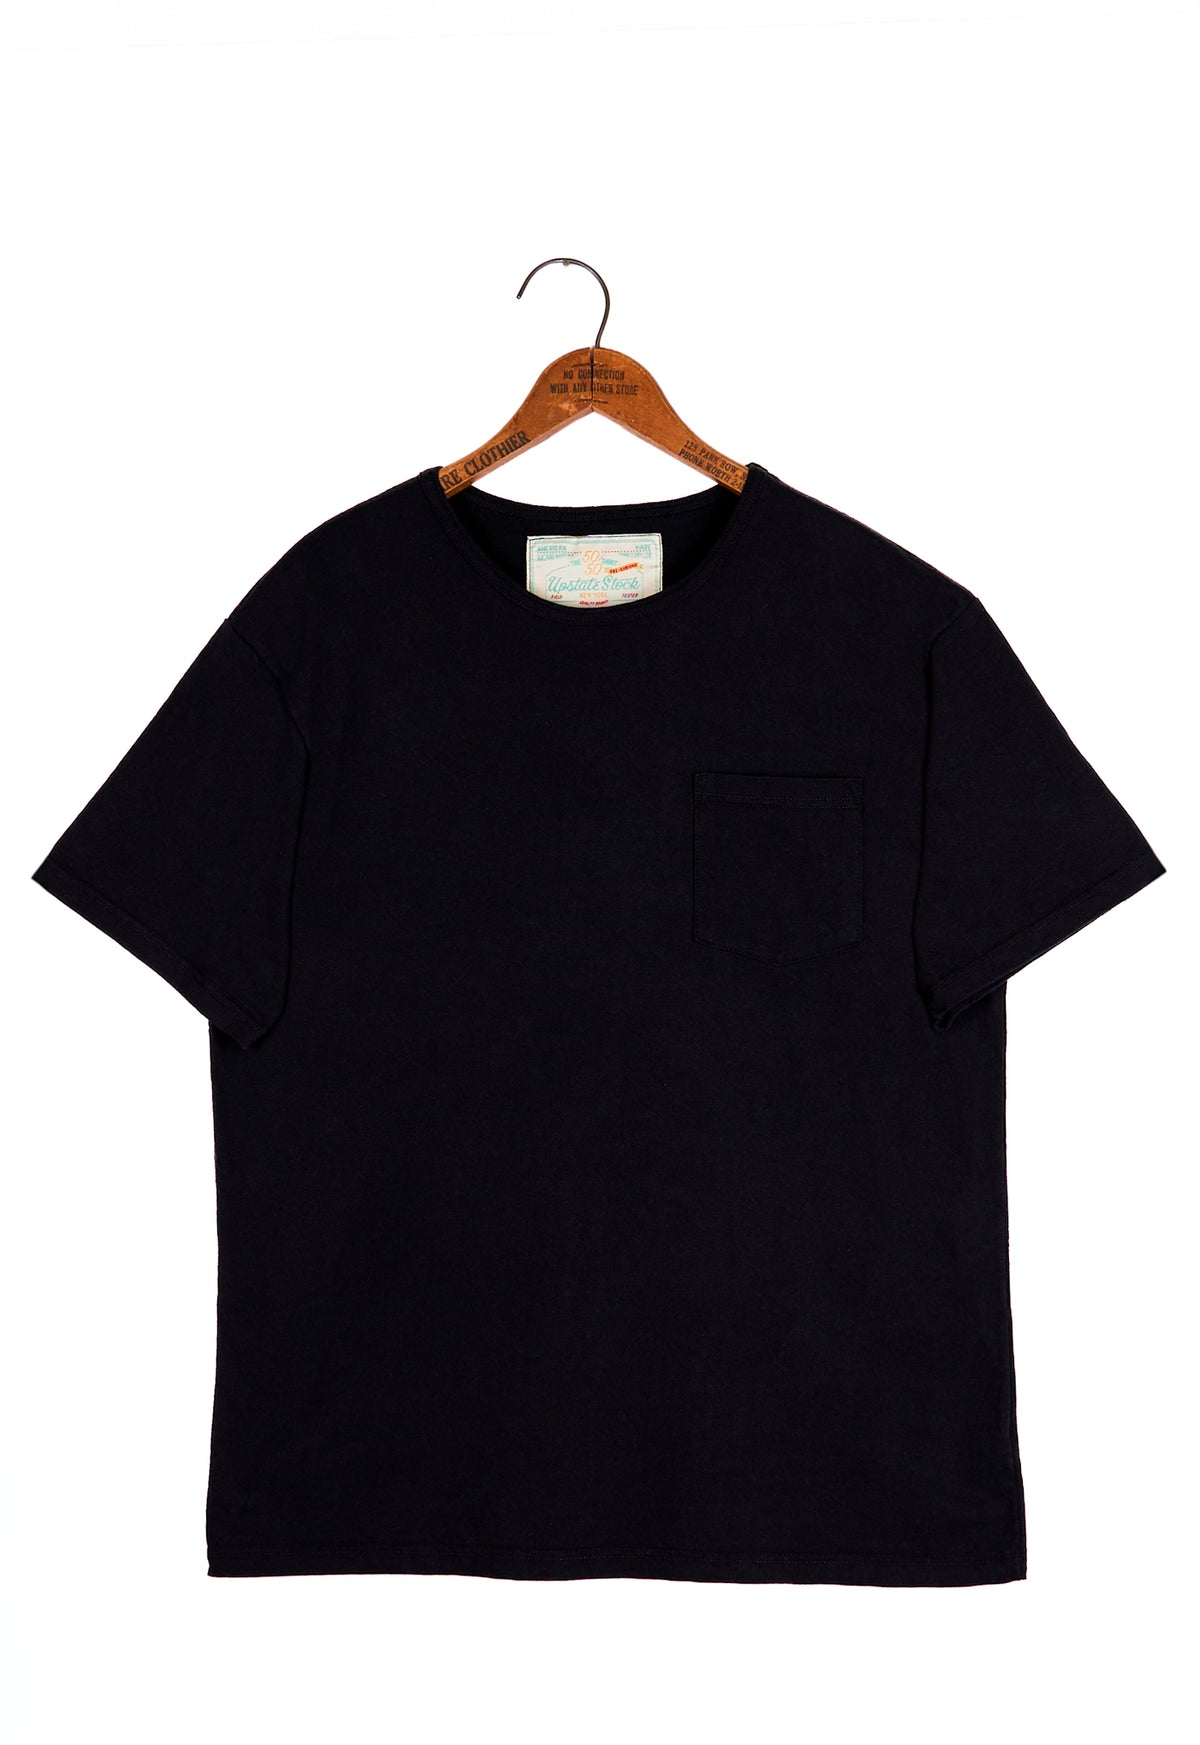 The 50/50 Shirt - POCKET TEE - Piece Dyed Black